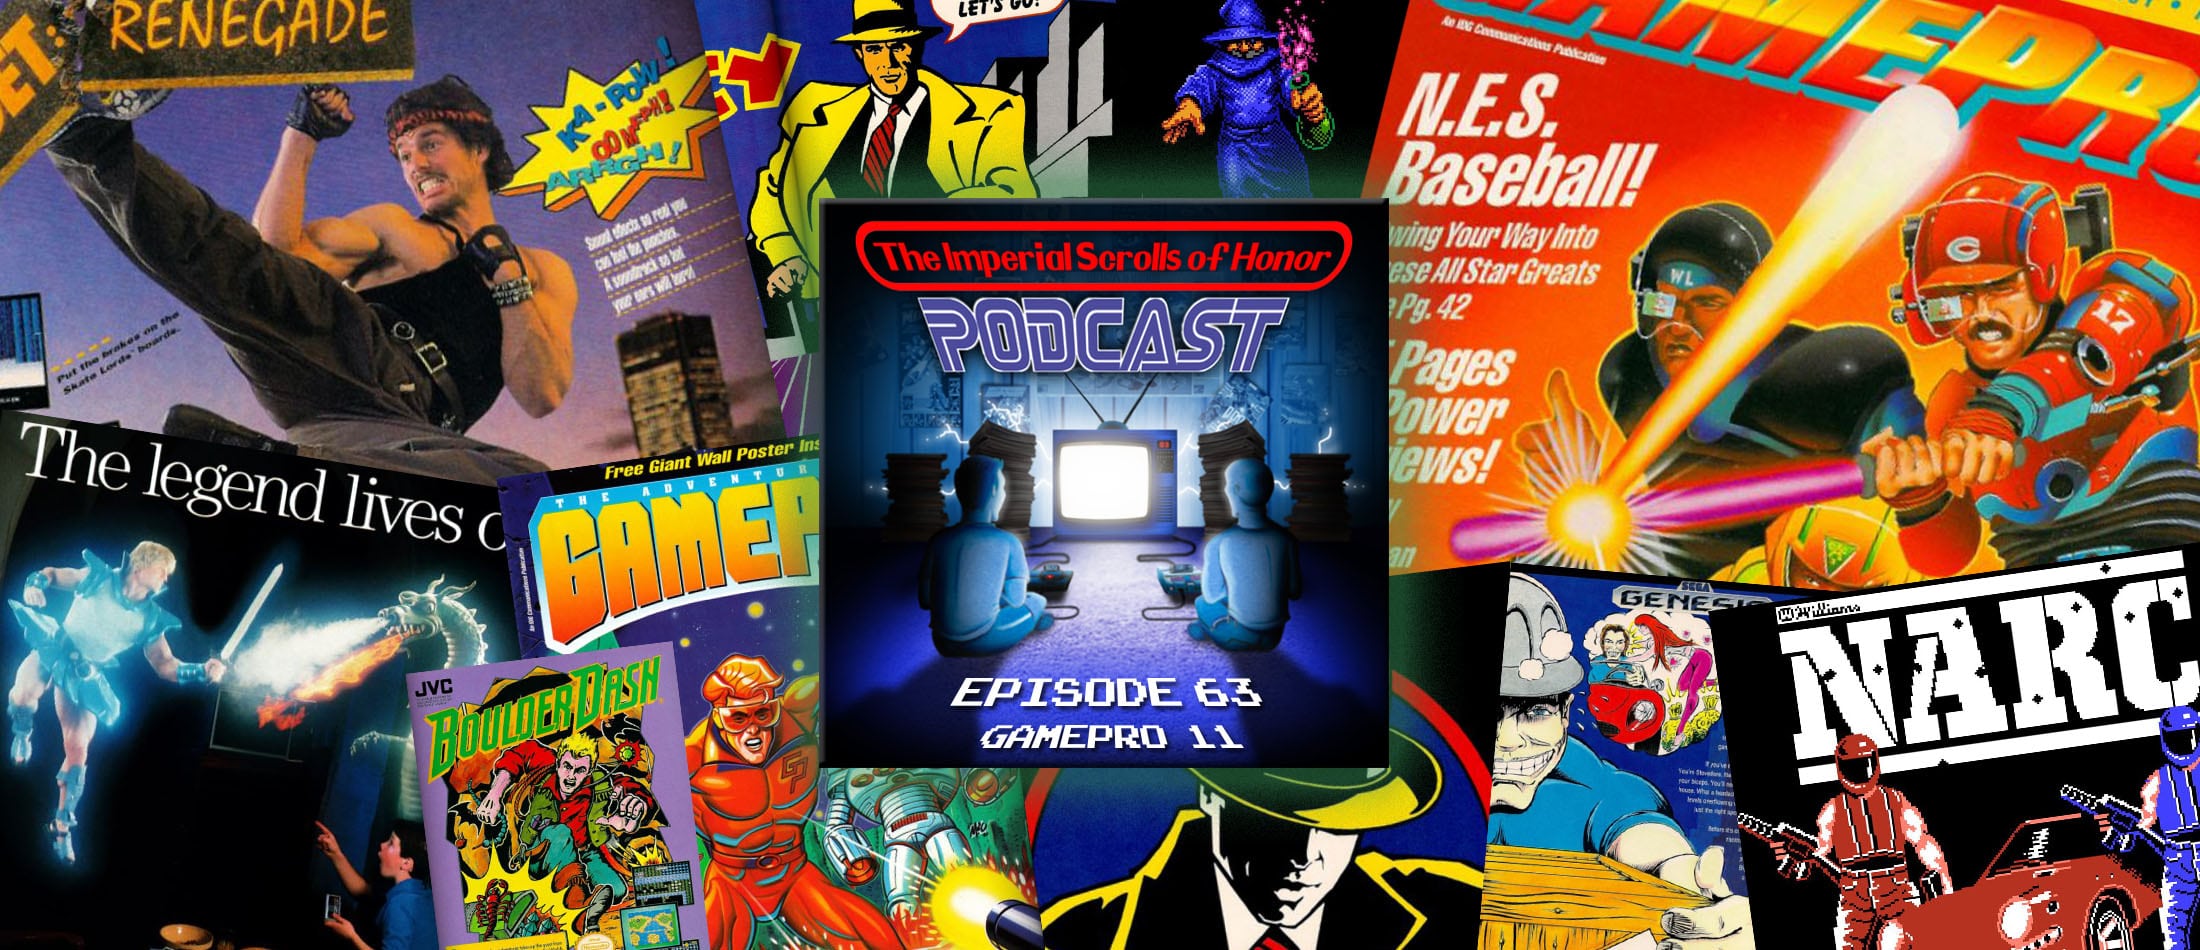 The Imperial Scrolls of Honor Podcast - Ep 63 - GamePro #11